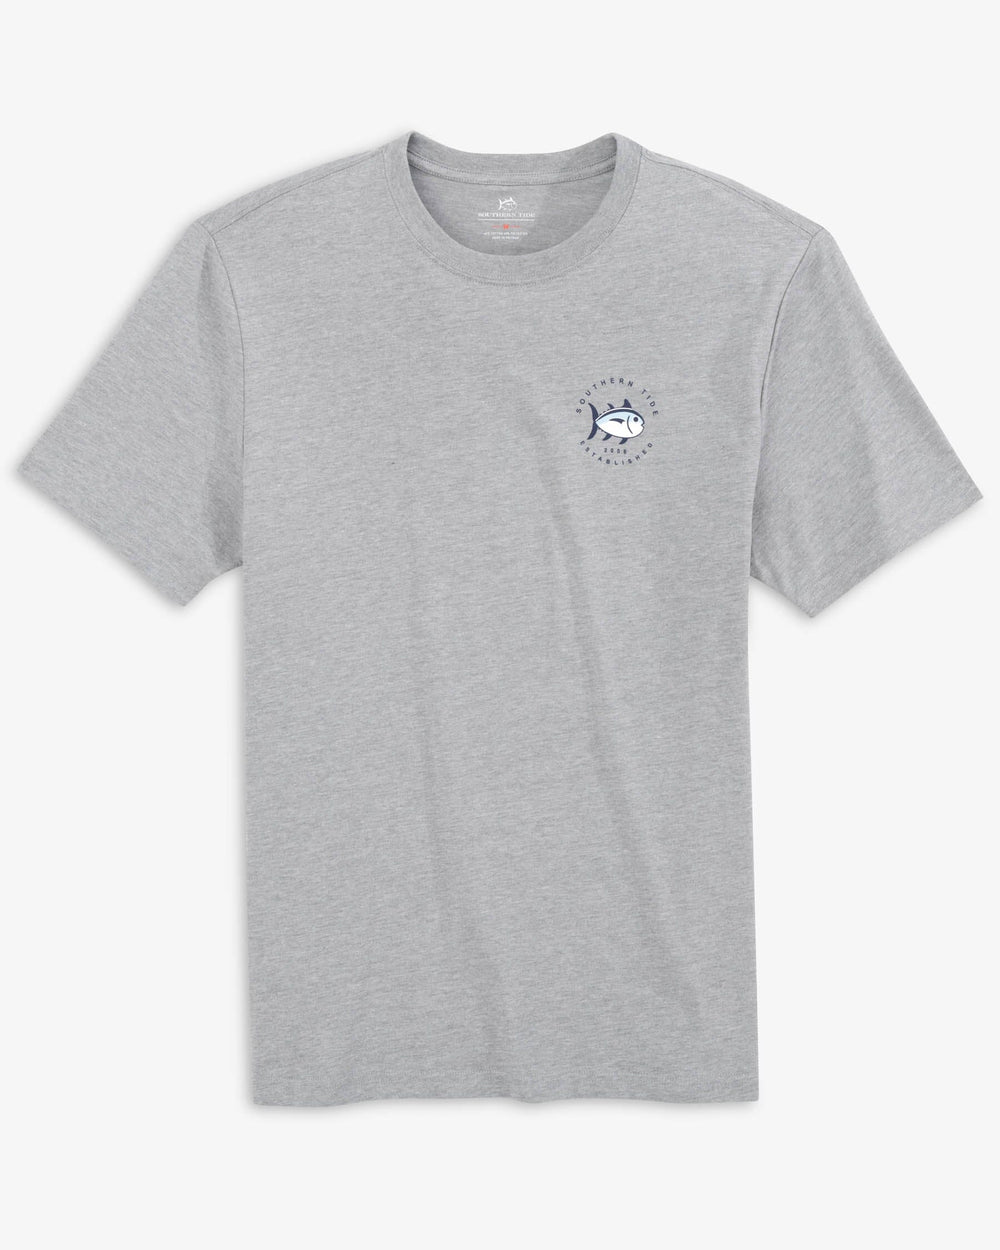 The front view of the Southern Tide Coastal Expedition Heather T-shirt by Southern Tide - Heather Quarry